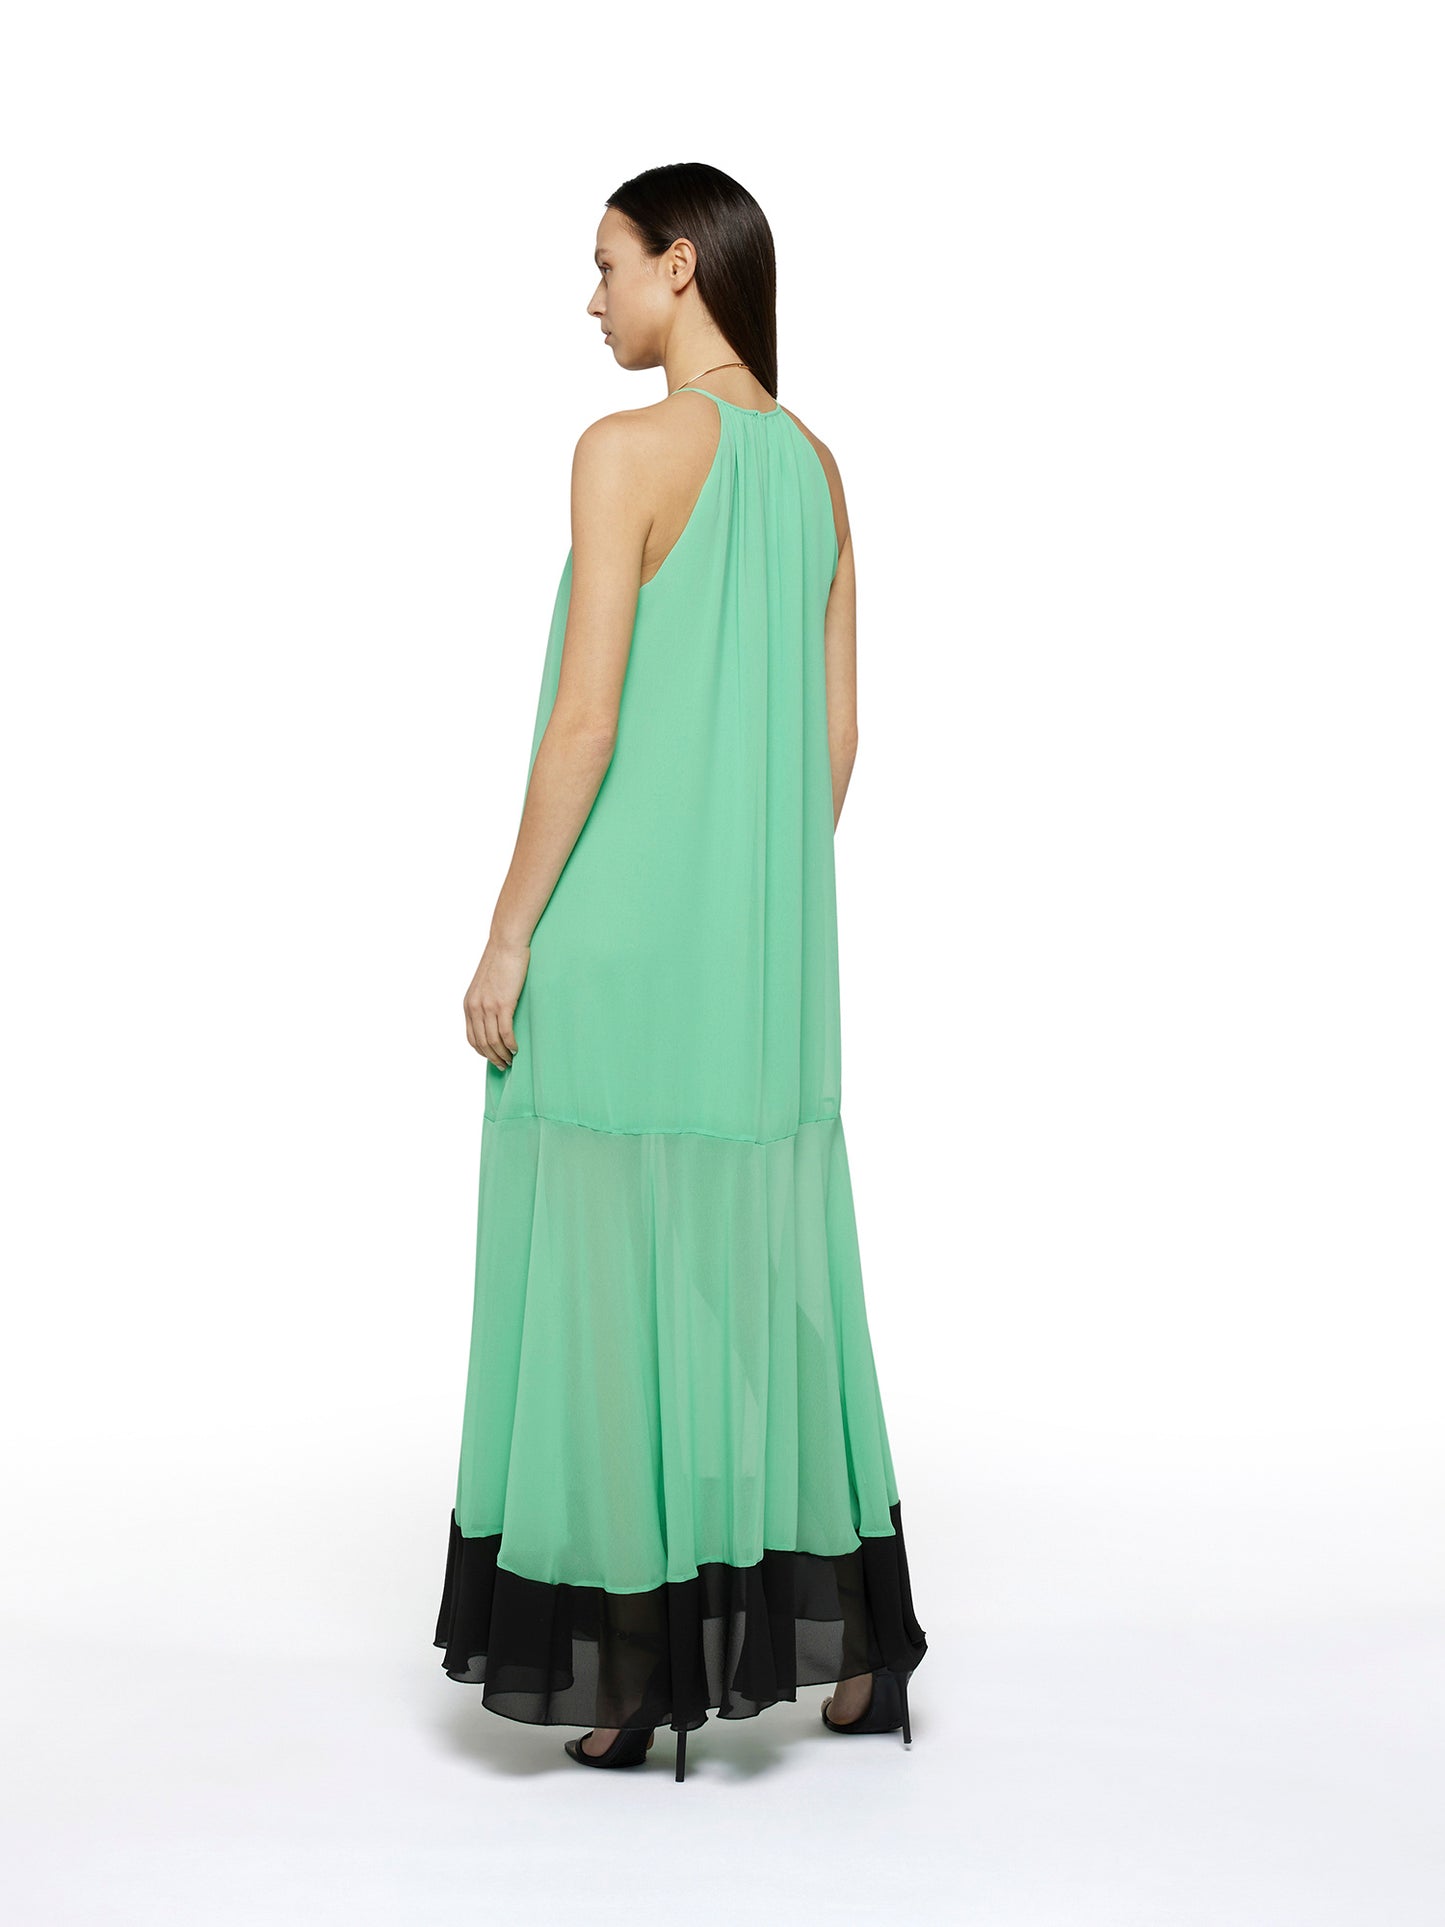 Long georgette dress with contrasting bottom ruffle